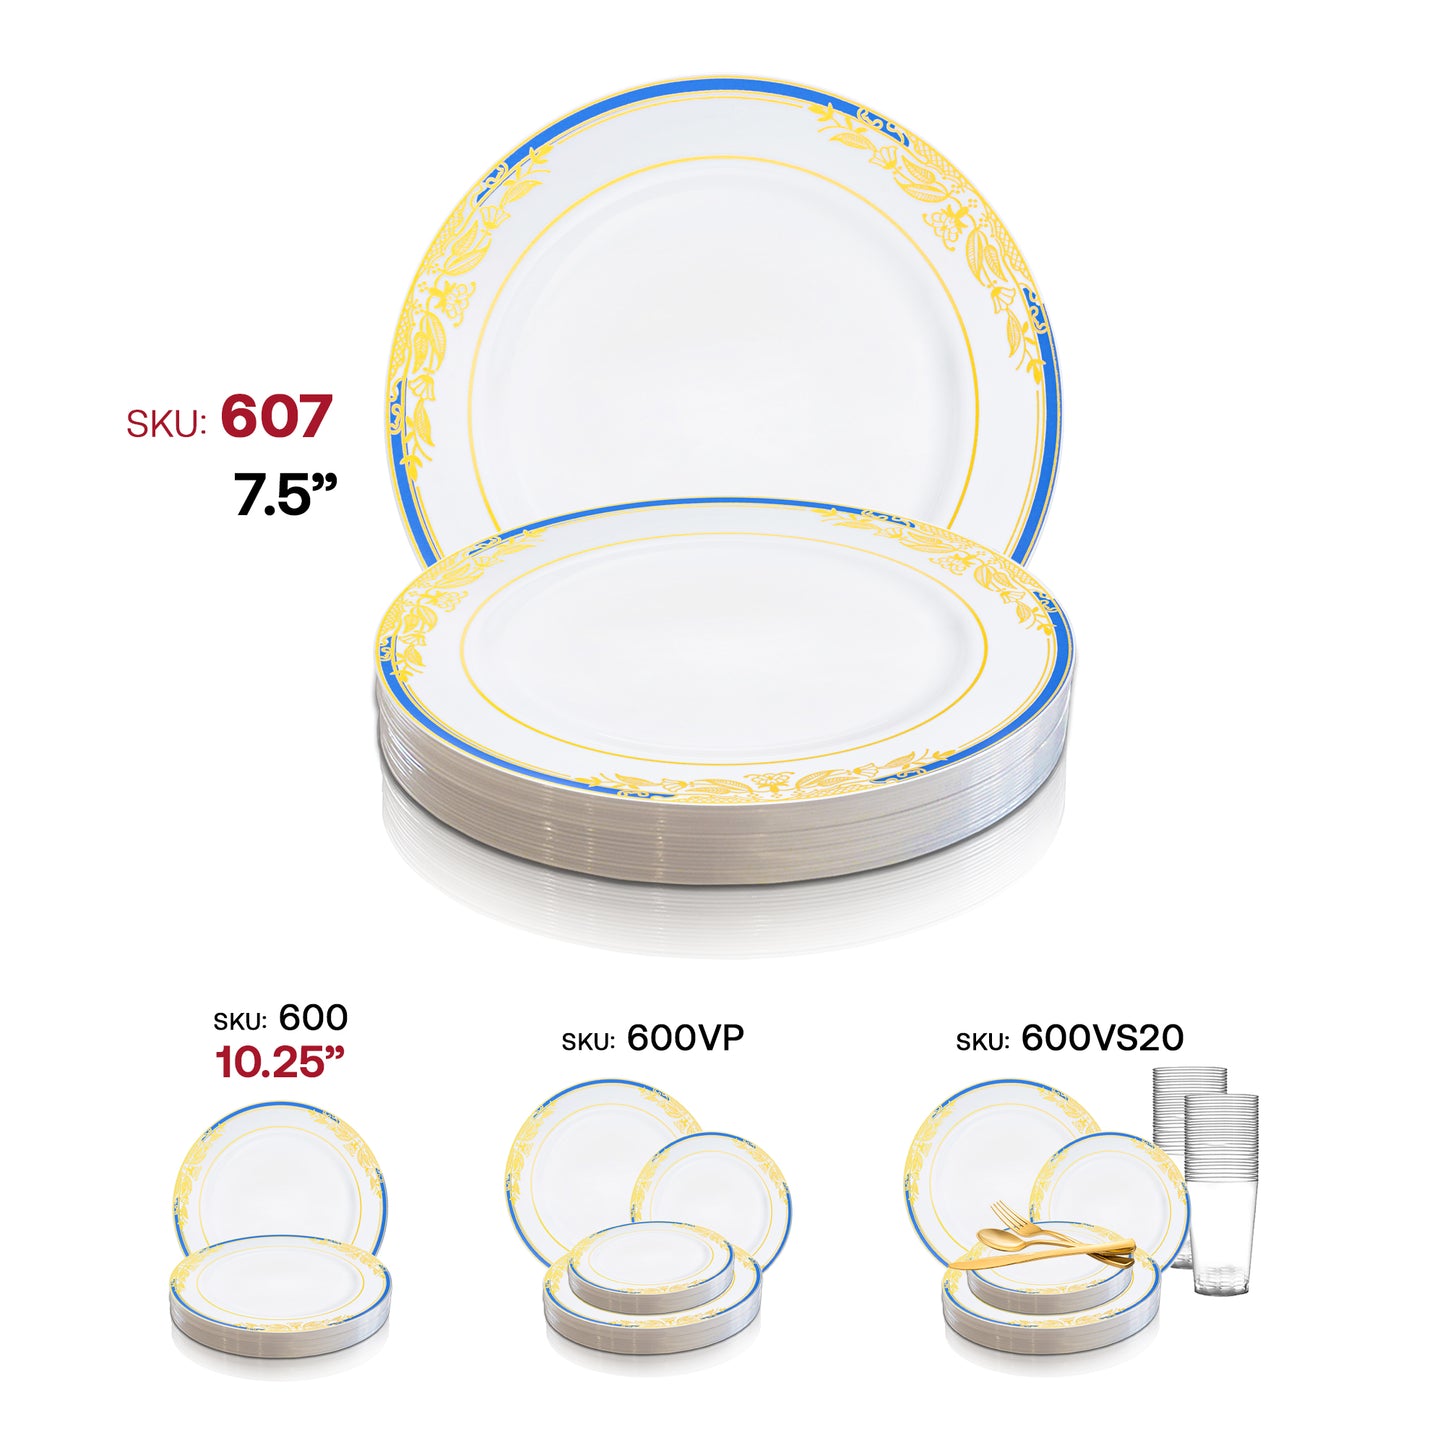 White with Blue and Gold Harmony Rim Plastic Appetizer/Salad Plates (7.5") SKU | The Kaya Collection